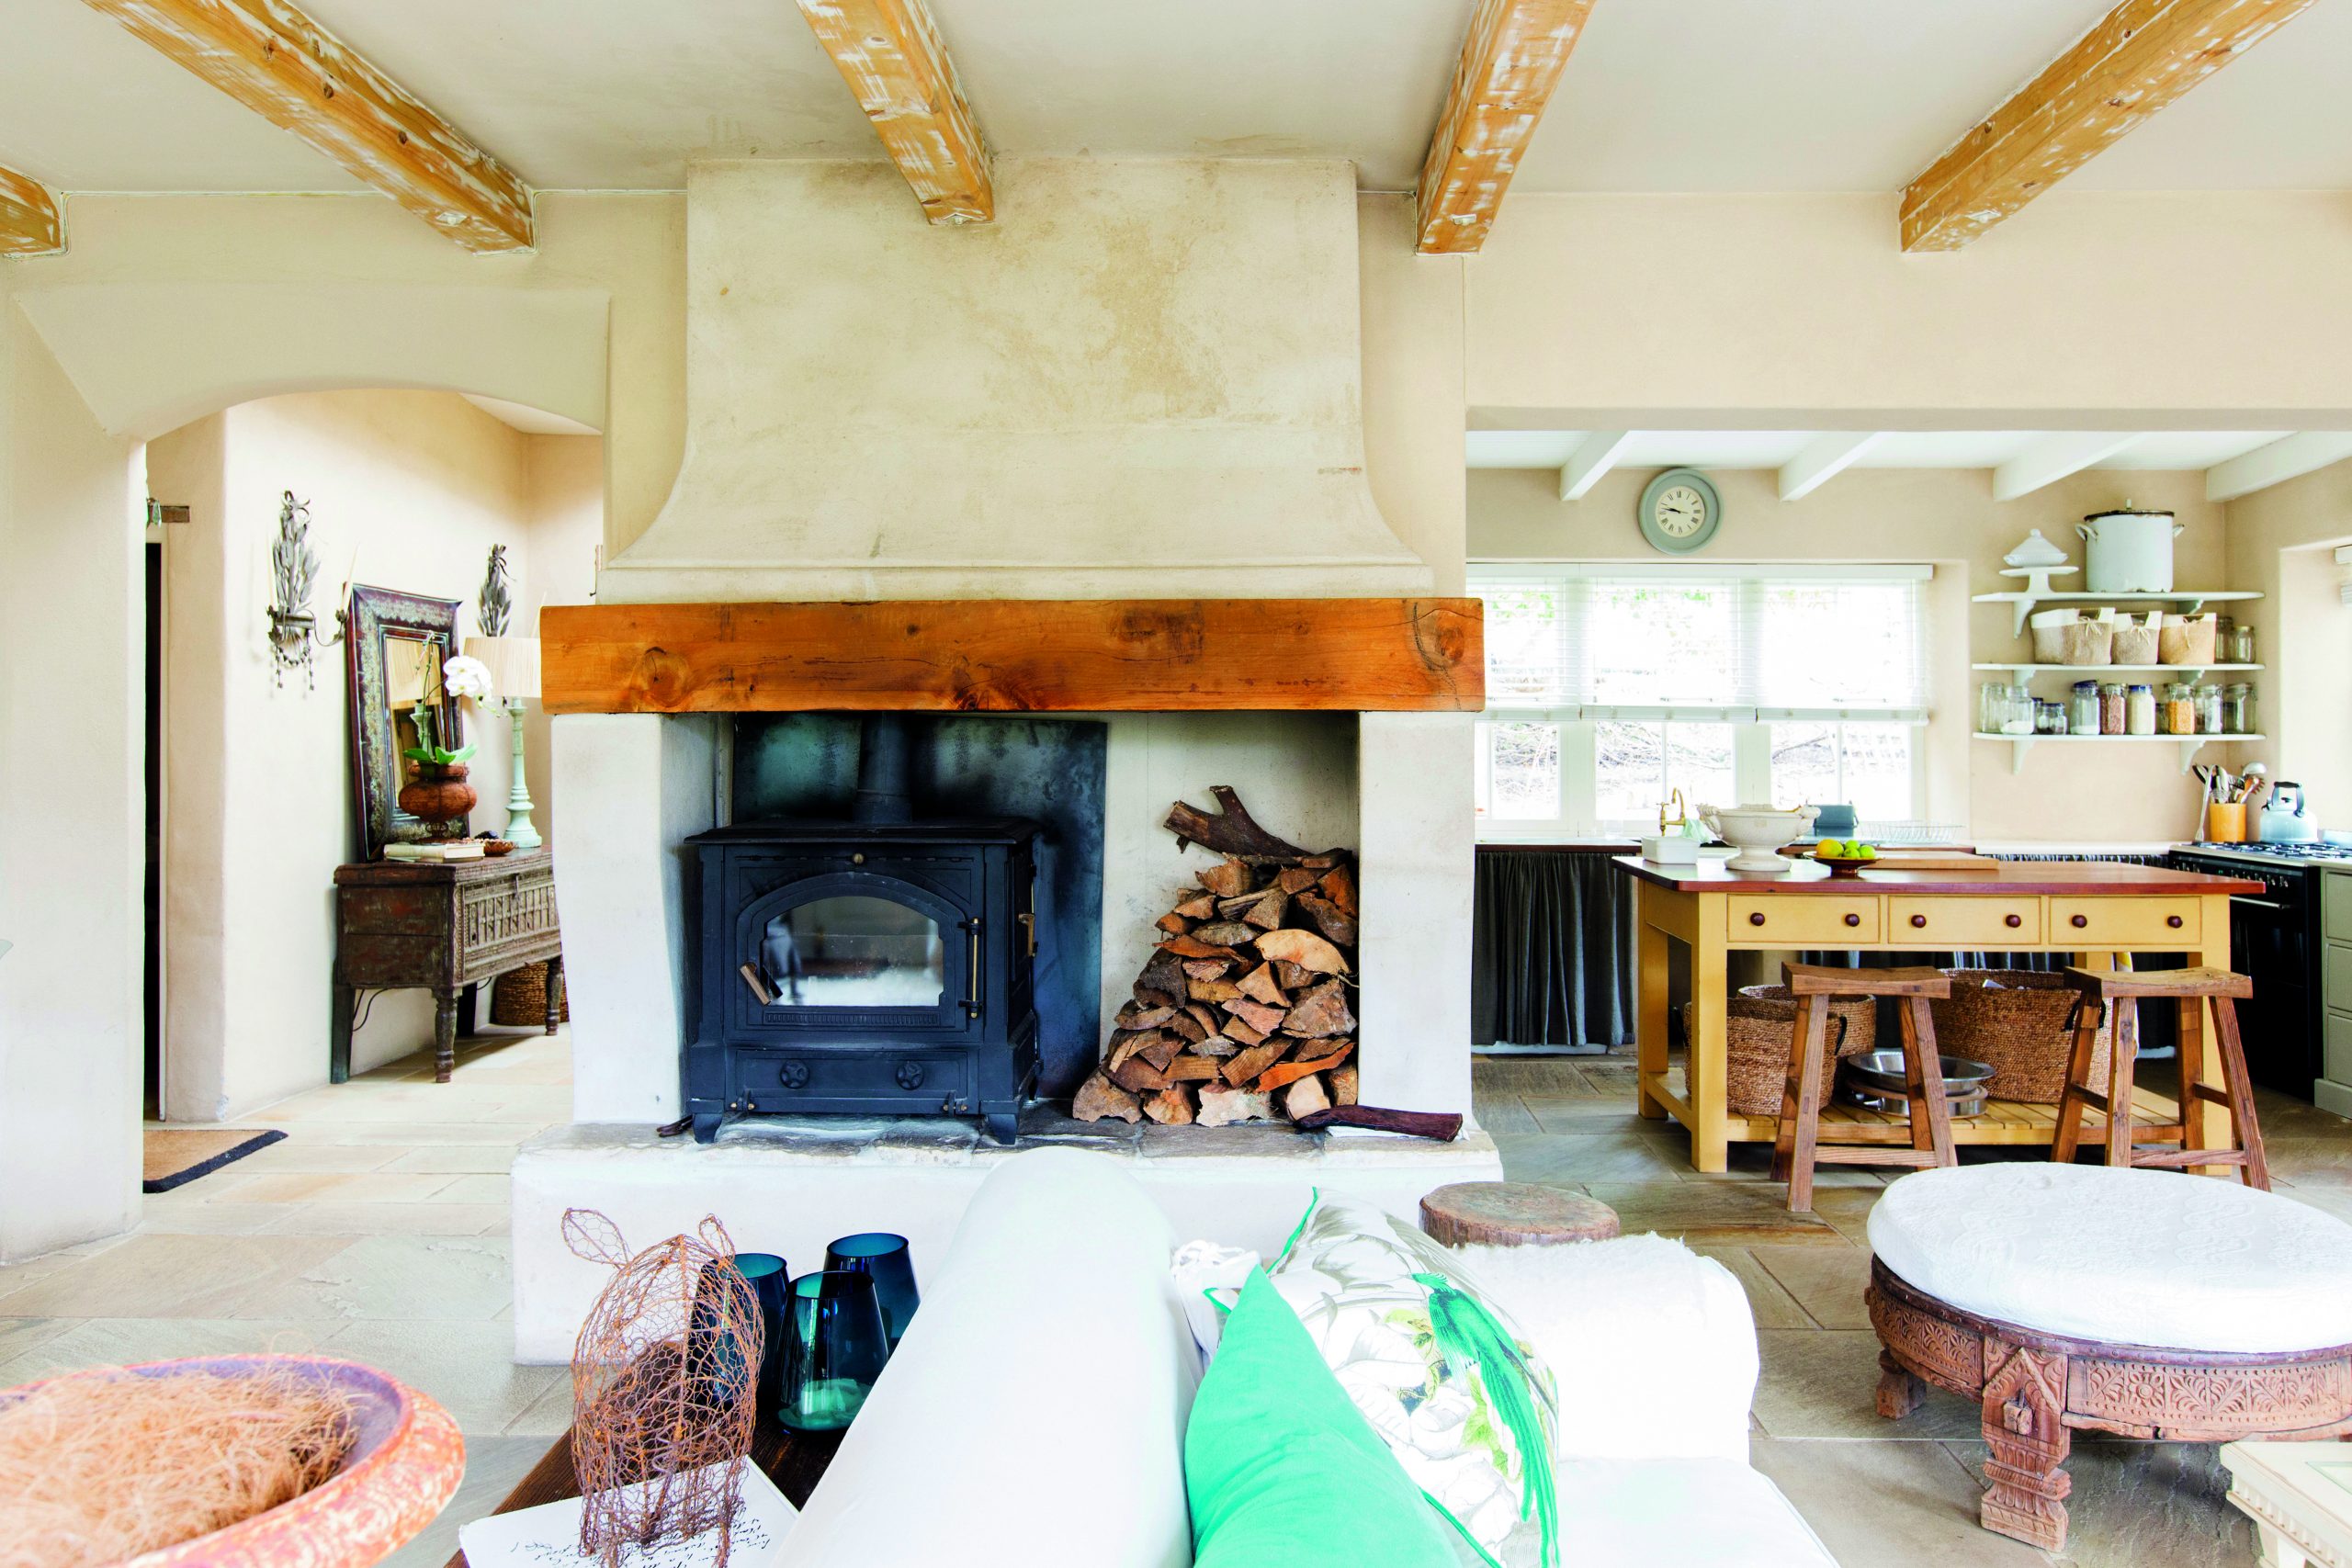 The clever use of reclaimed oak furniture can give a space the look a cottage.